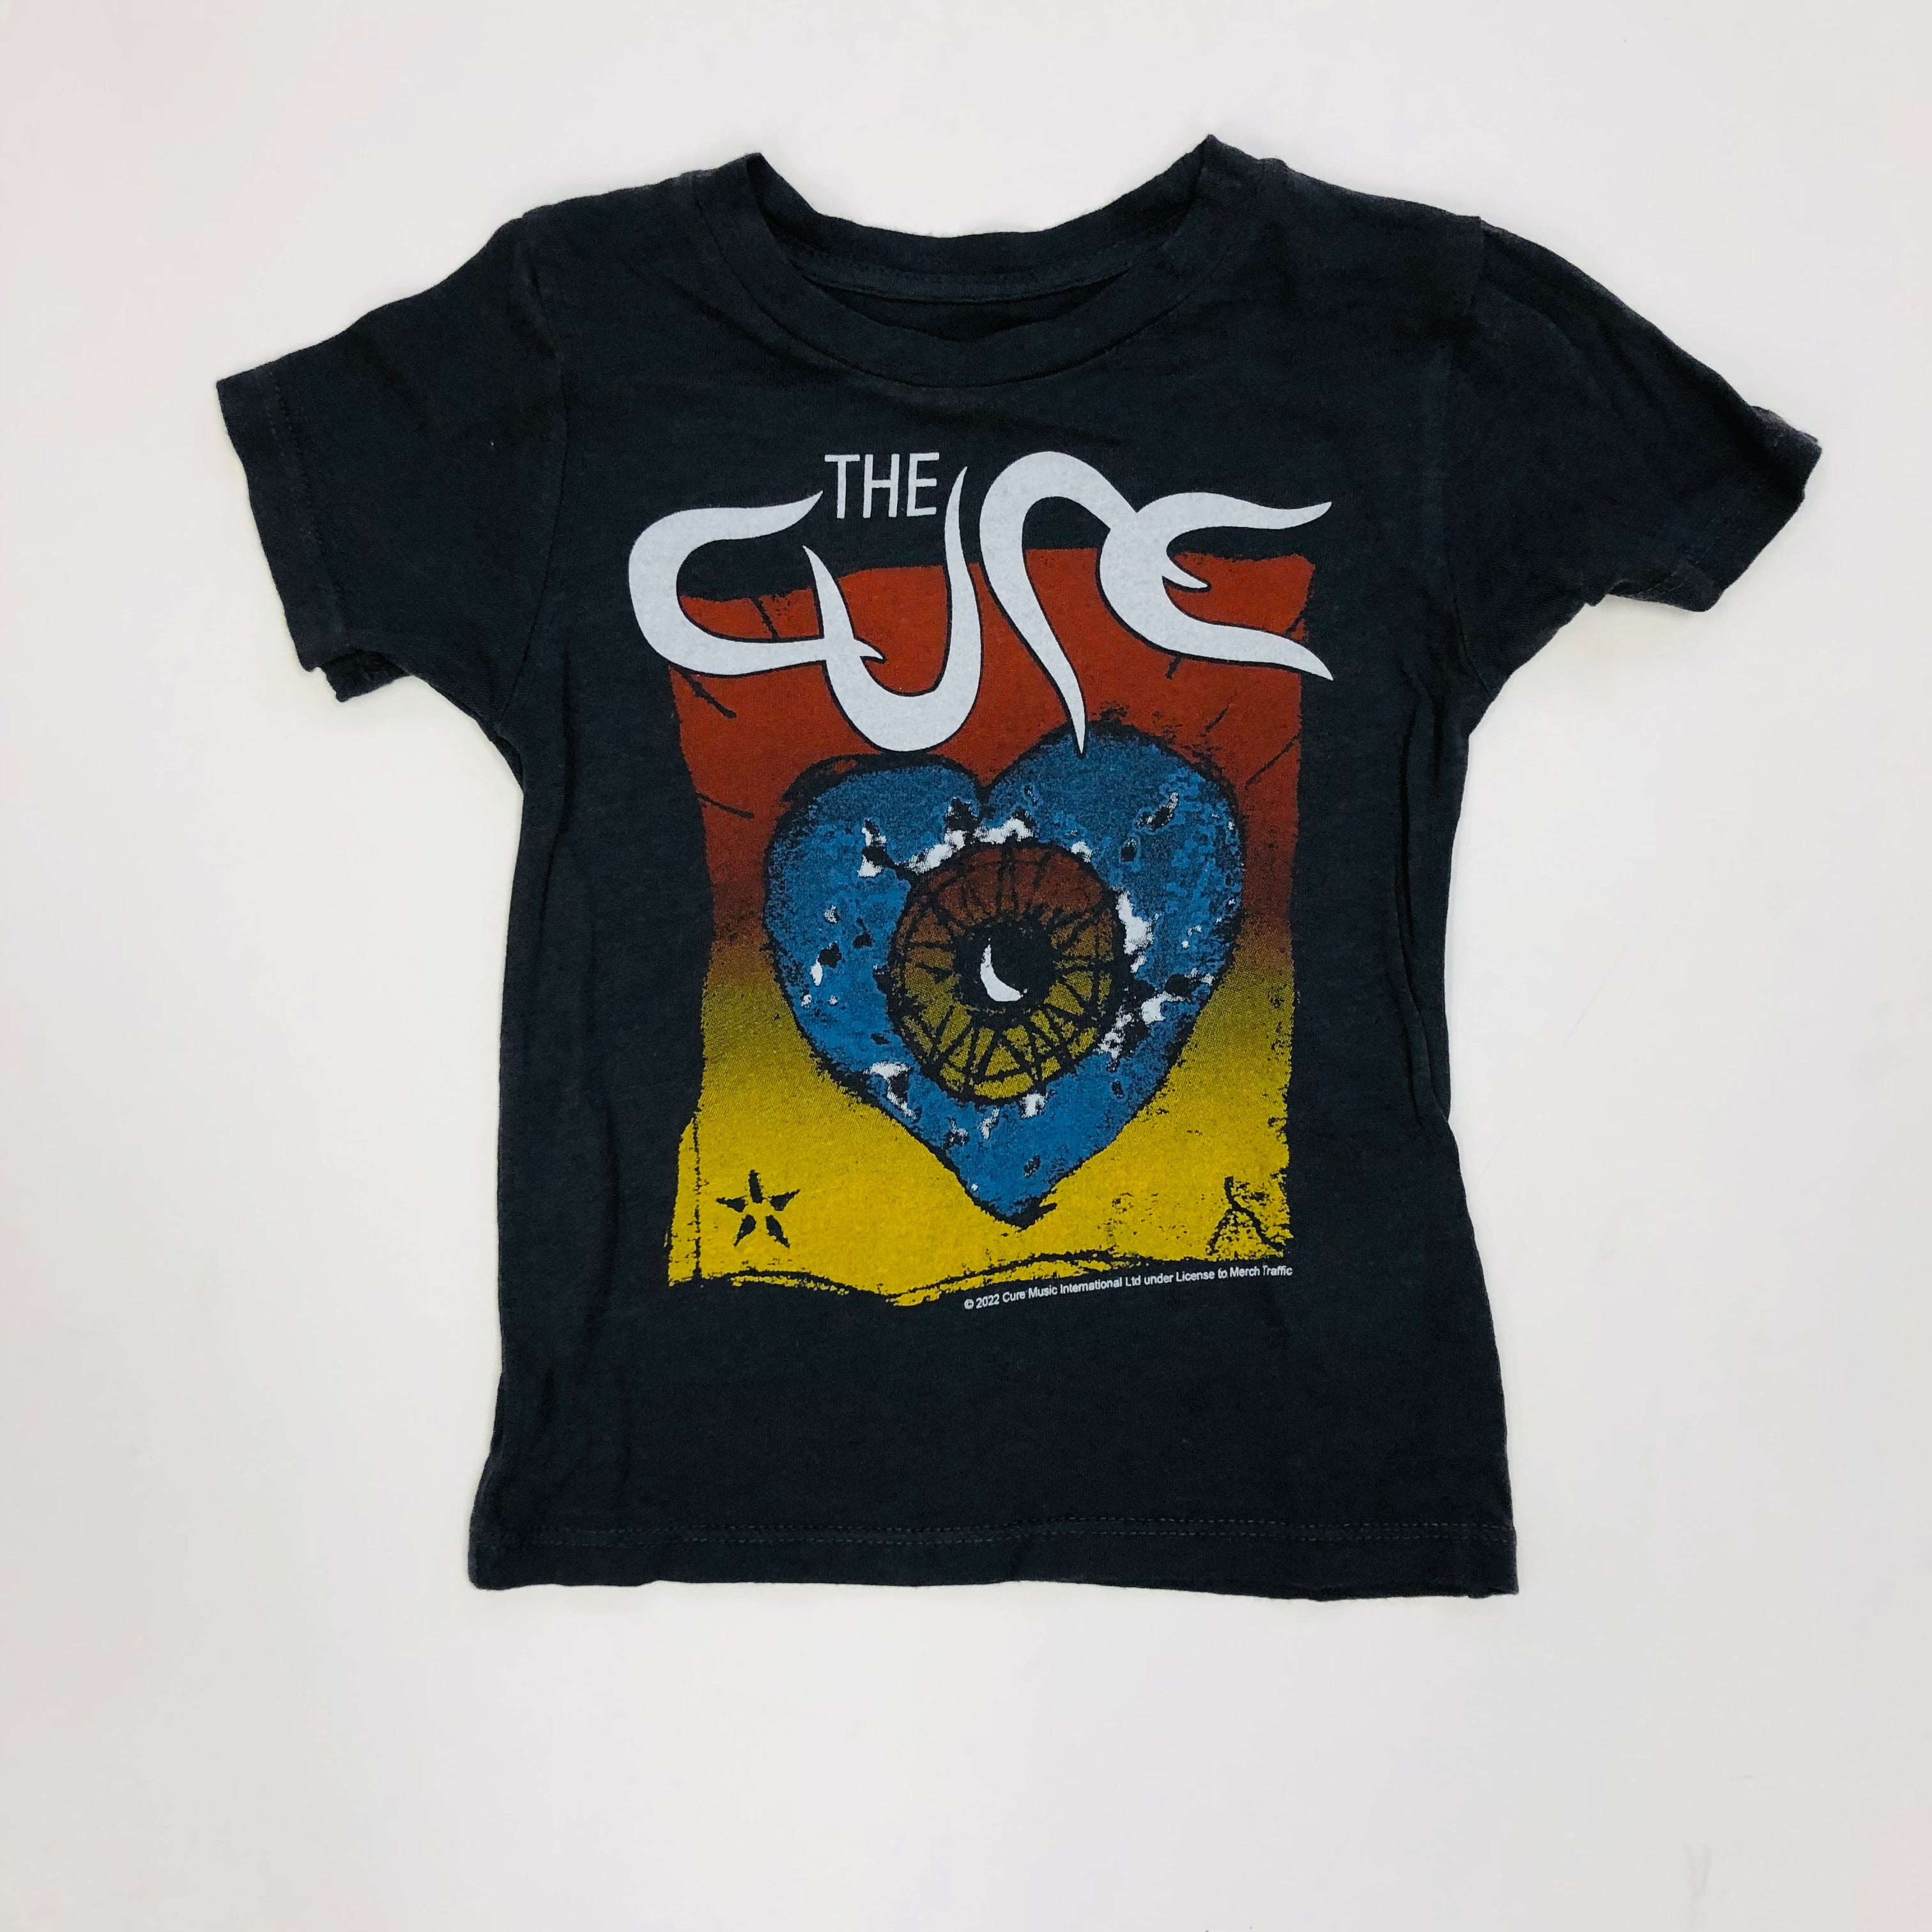 The Cure Tee – Charlotte West Baby